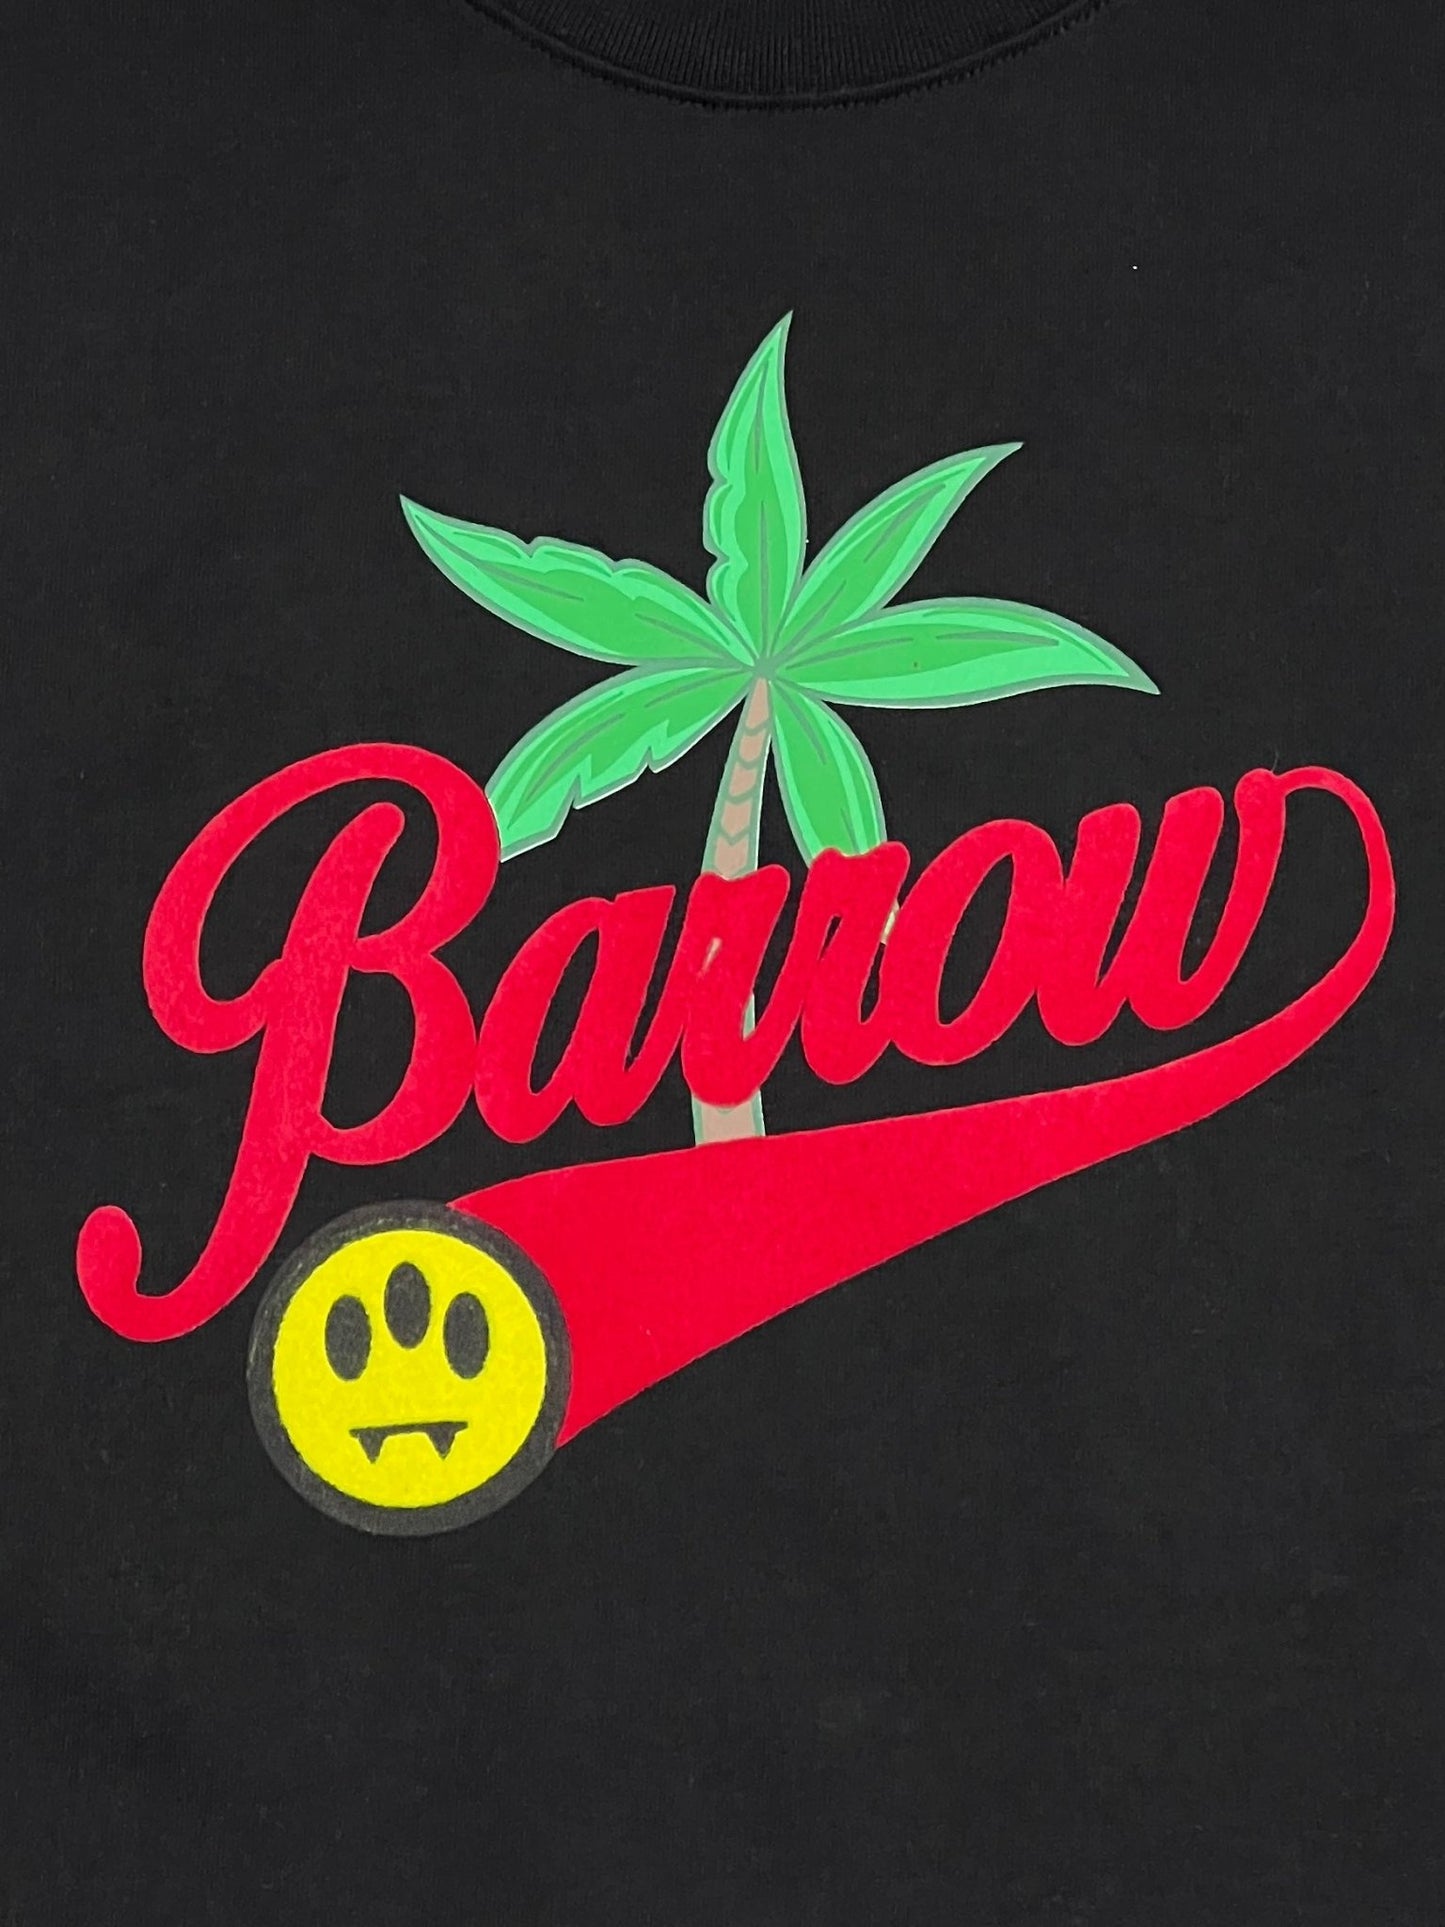 BARROW S4BWUATH036 JERSEY T-SHIRT UNISEX design featuring the word "bayou" with a palm tree and a smiley face on a black background, made from 100% Cotton by BARROW.